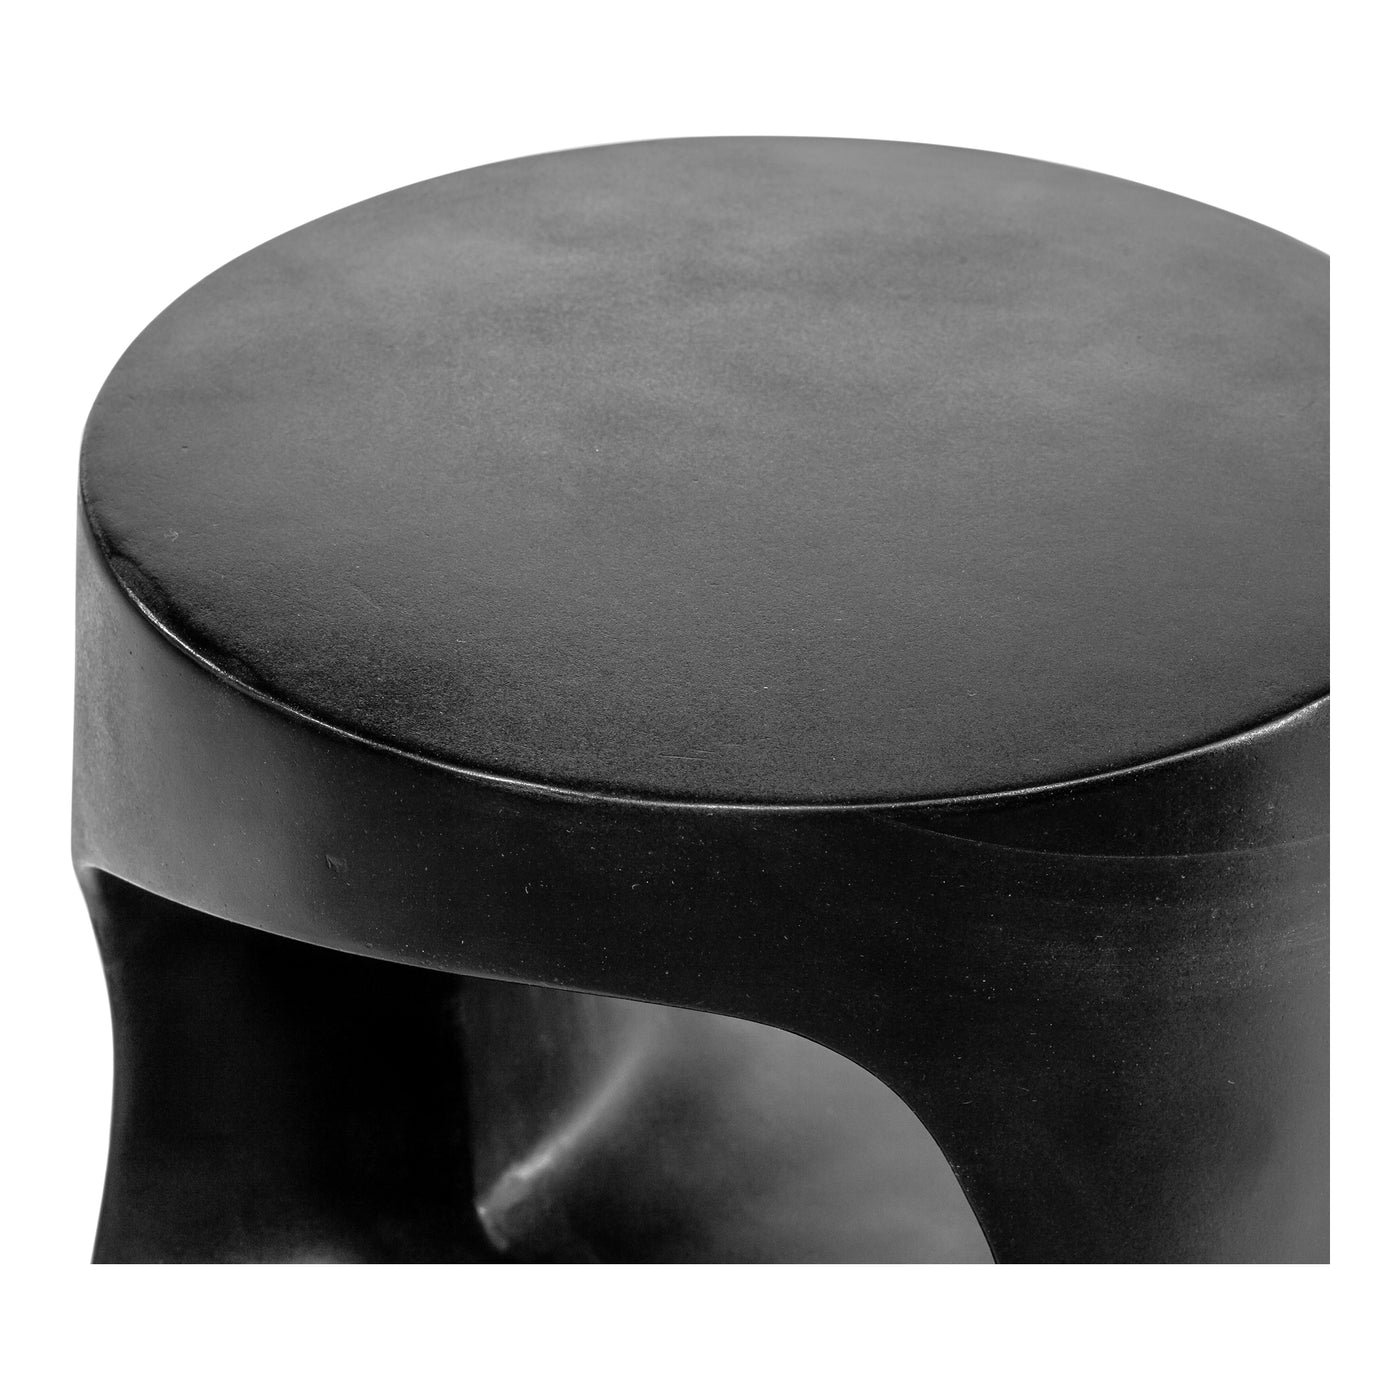 The blend of art and function into sculptural seating. This monolithic indoor or outdoor stool design is a work of art, re...